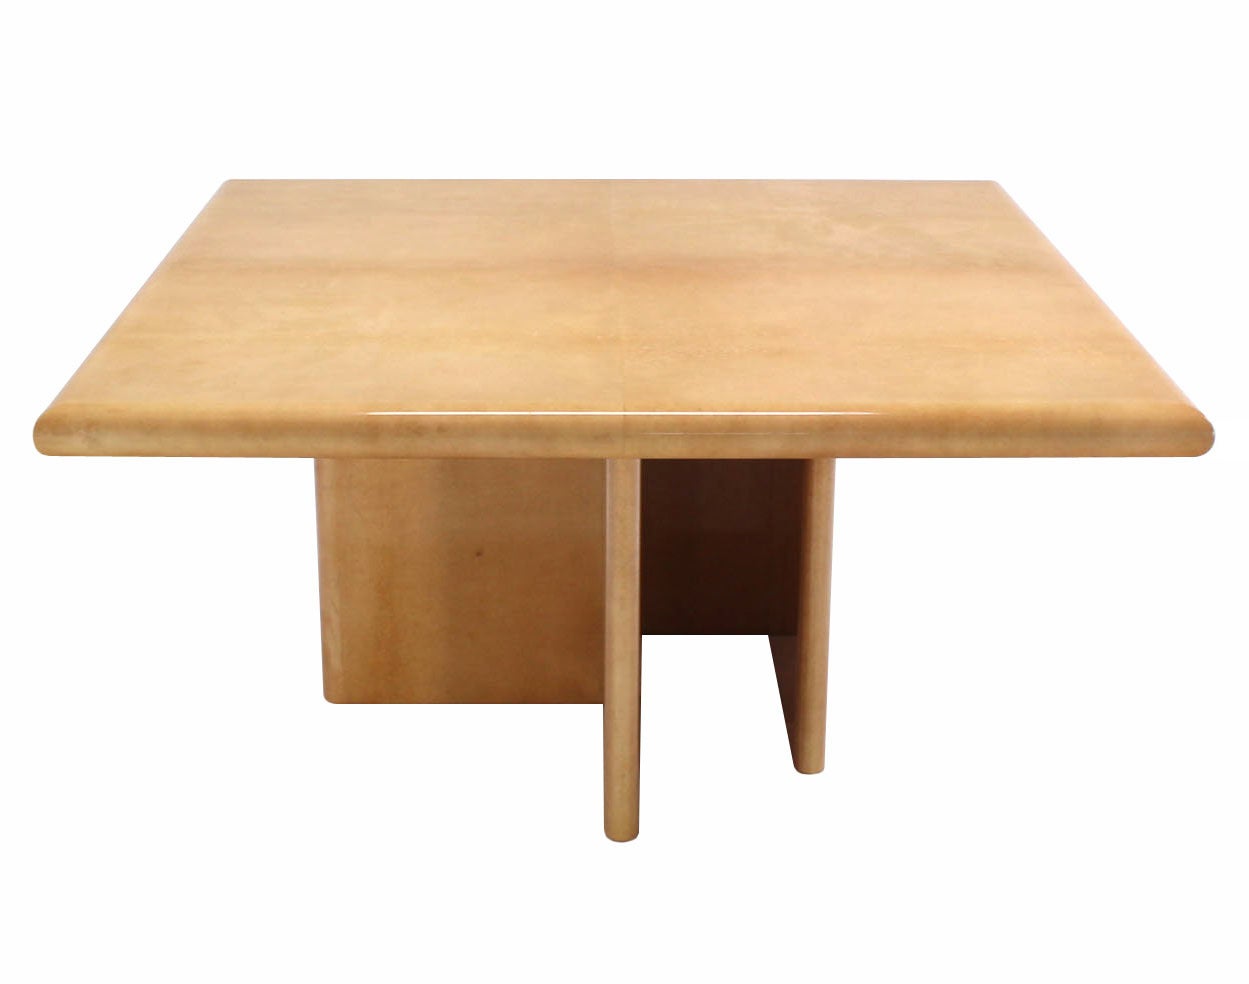 American Large Square Lacquered Goat Skin Conference Dining Table